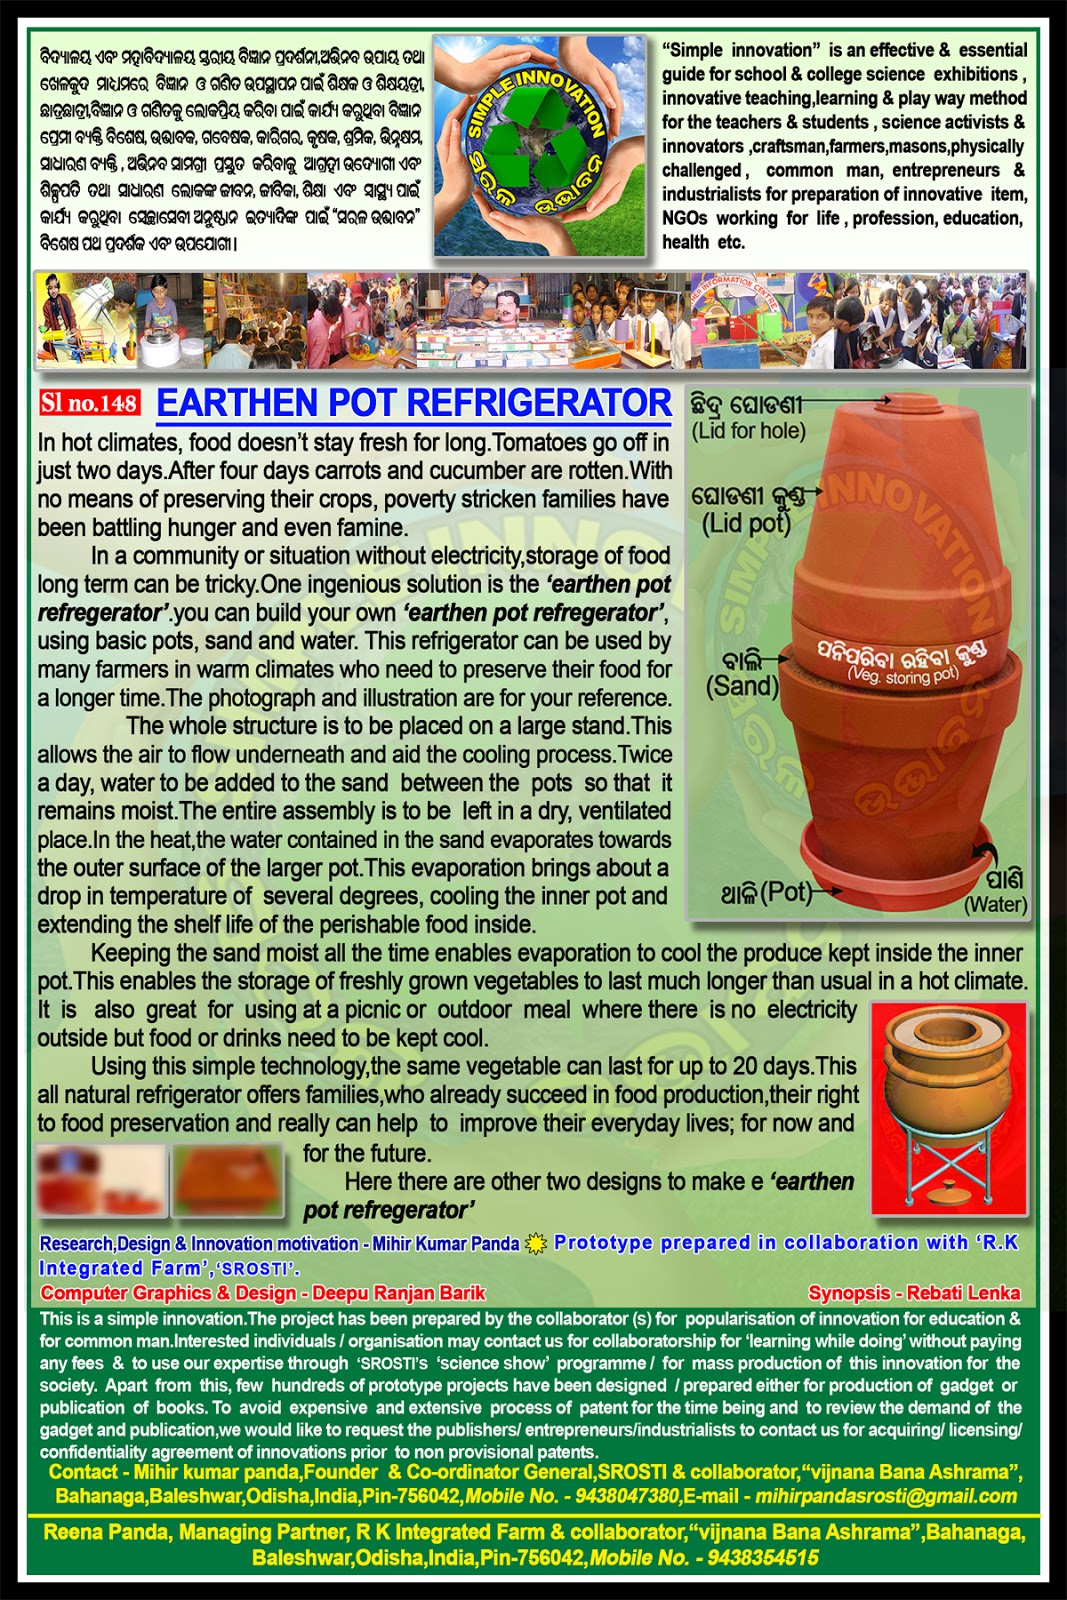  FOR SCIENCE EXHIBITION: Earthen Pot Refrigerator-science project